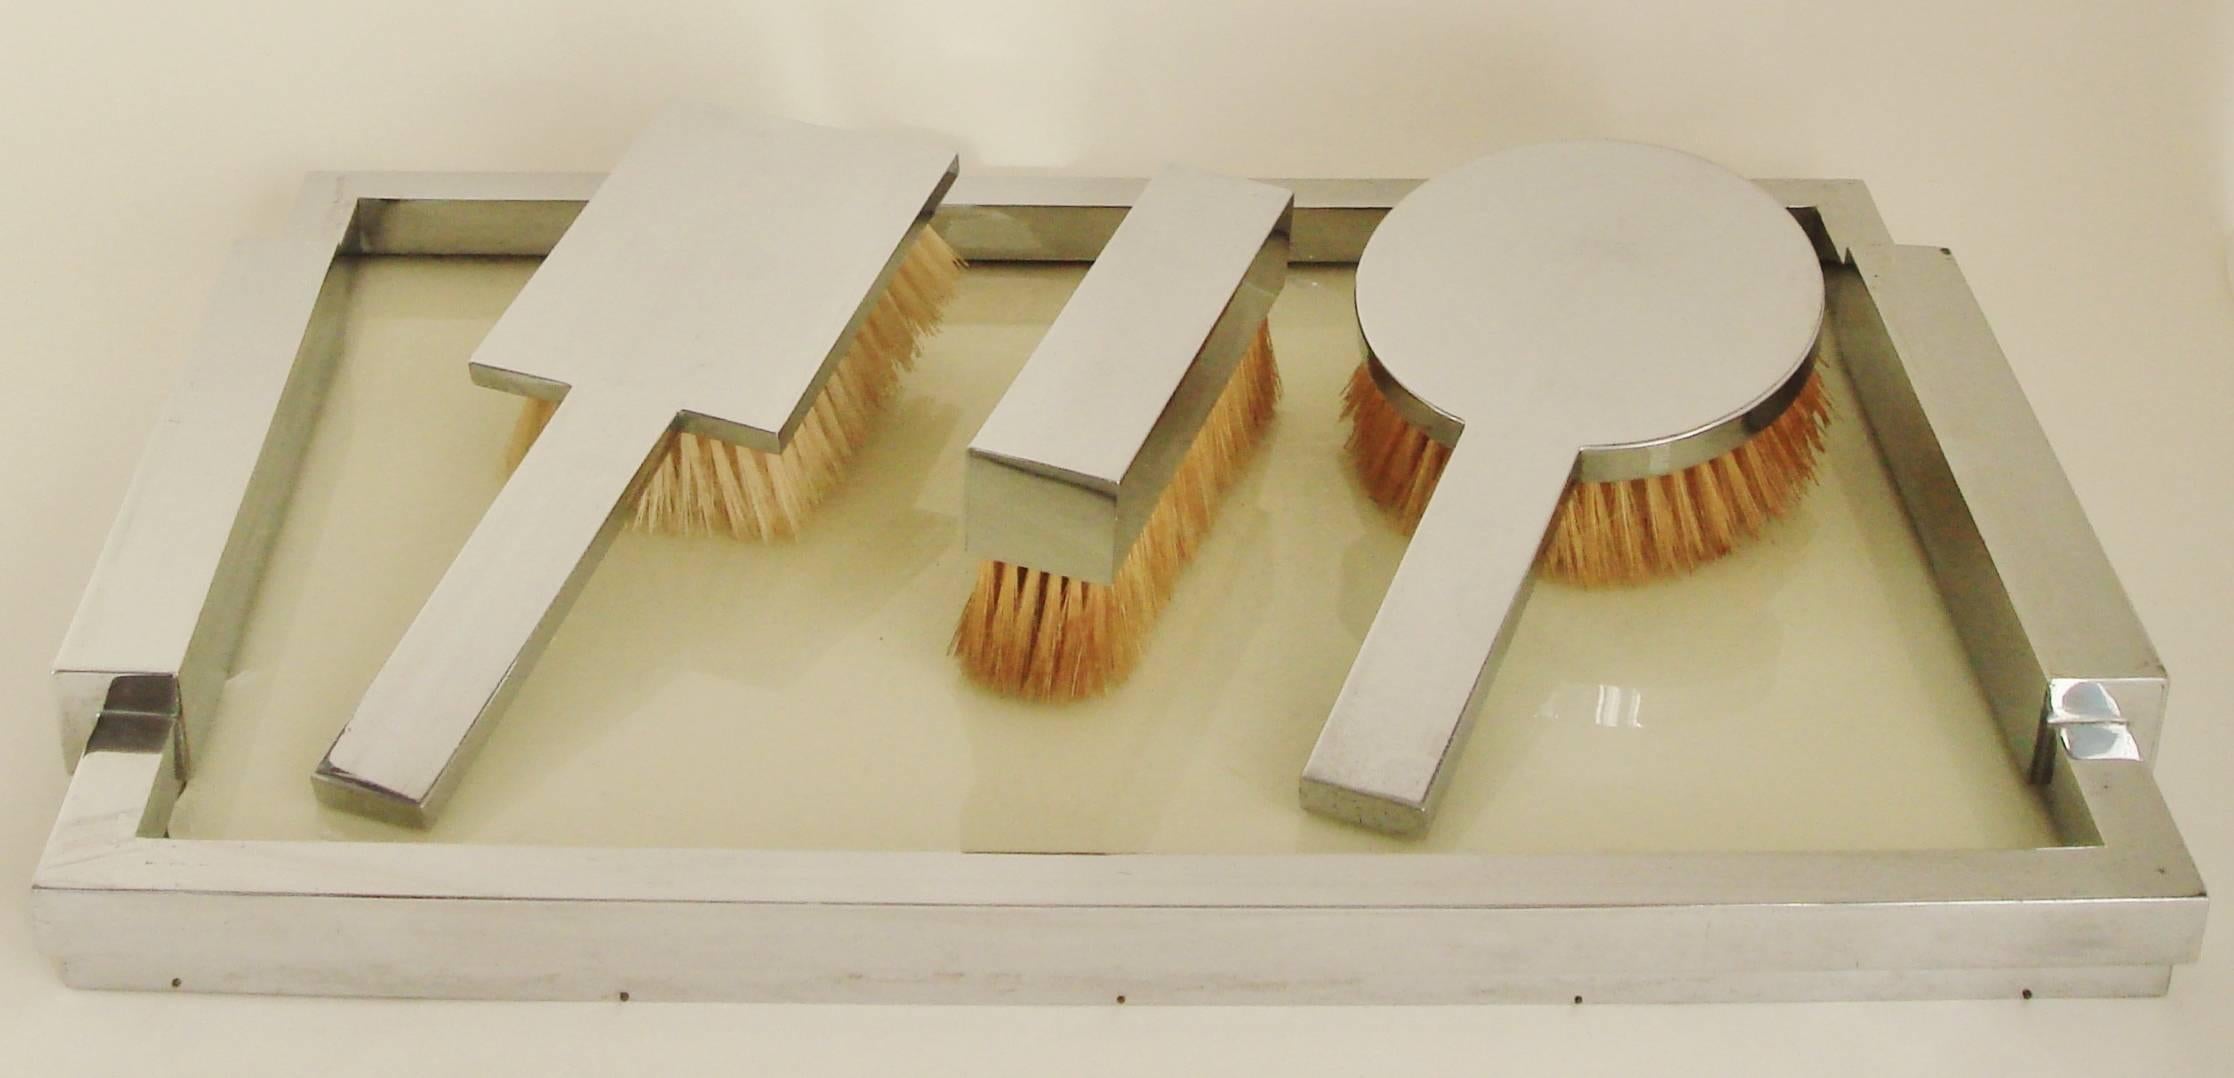 English Art Deco Reverse Painted Glass Four-Piece Gent's Brush & Tray Set For Sale 5